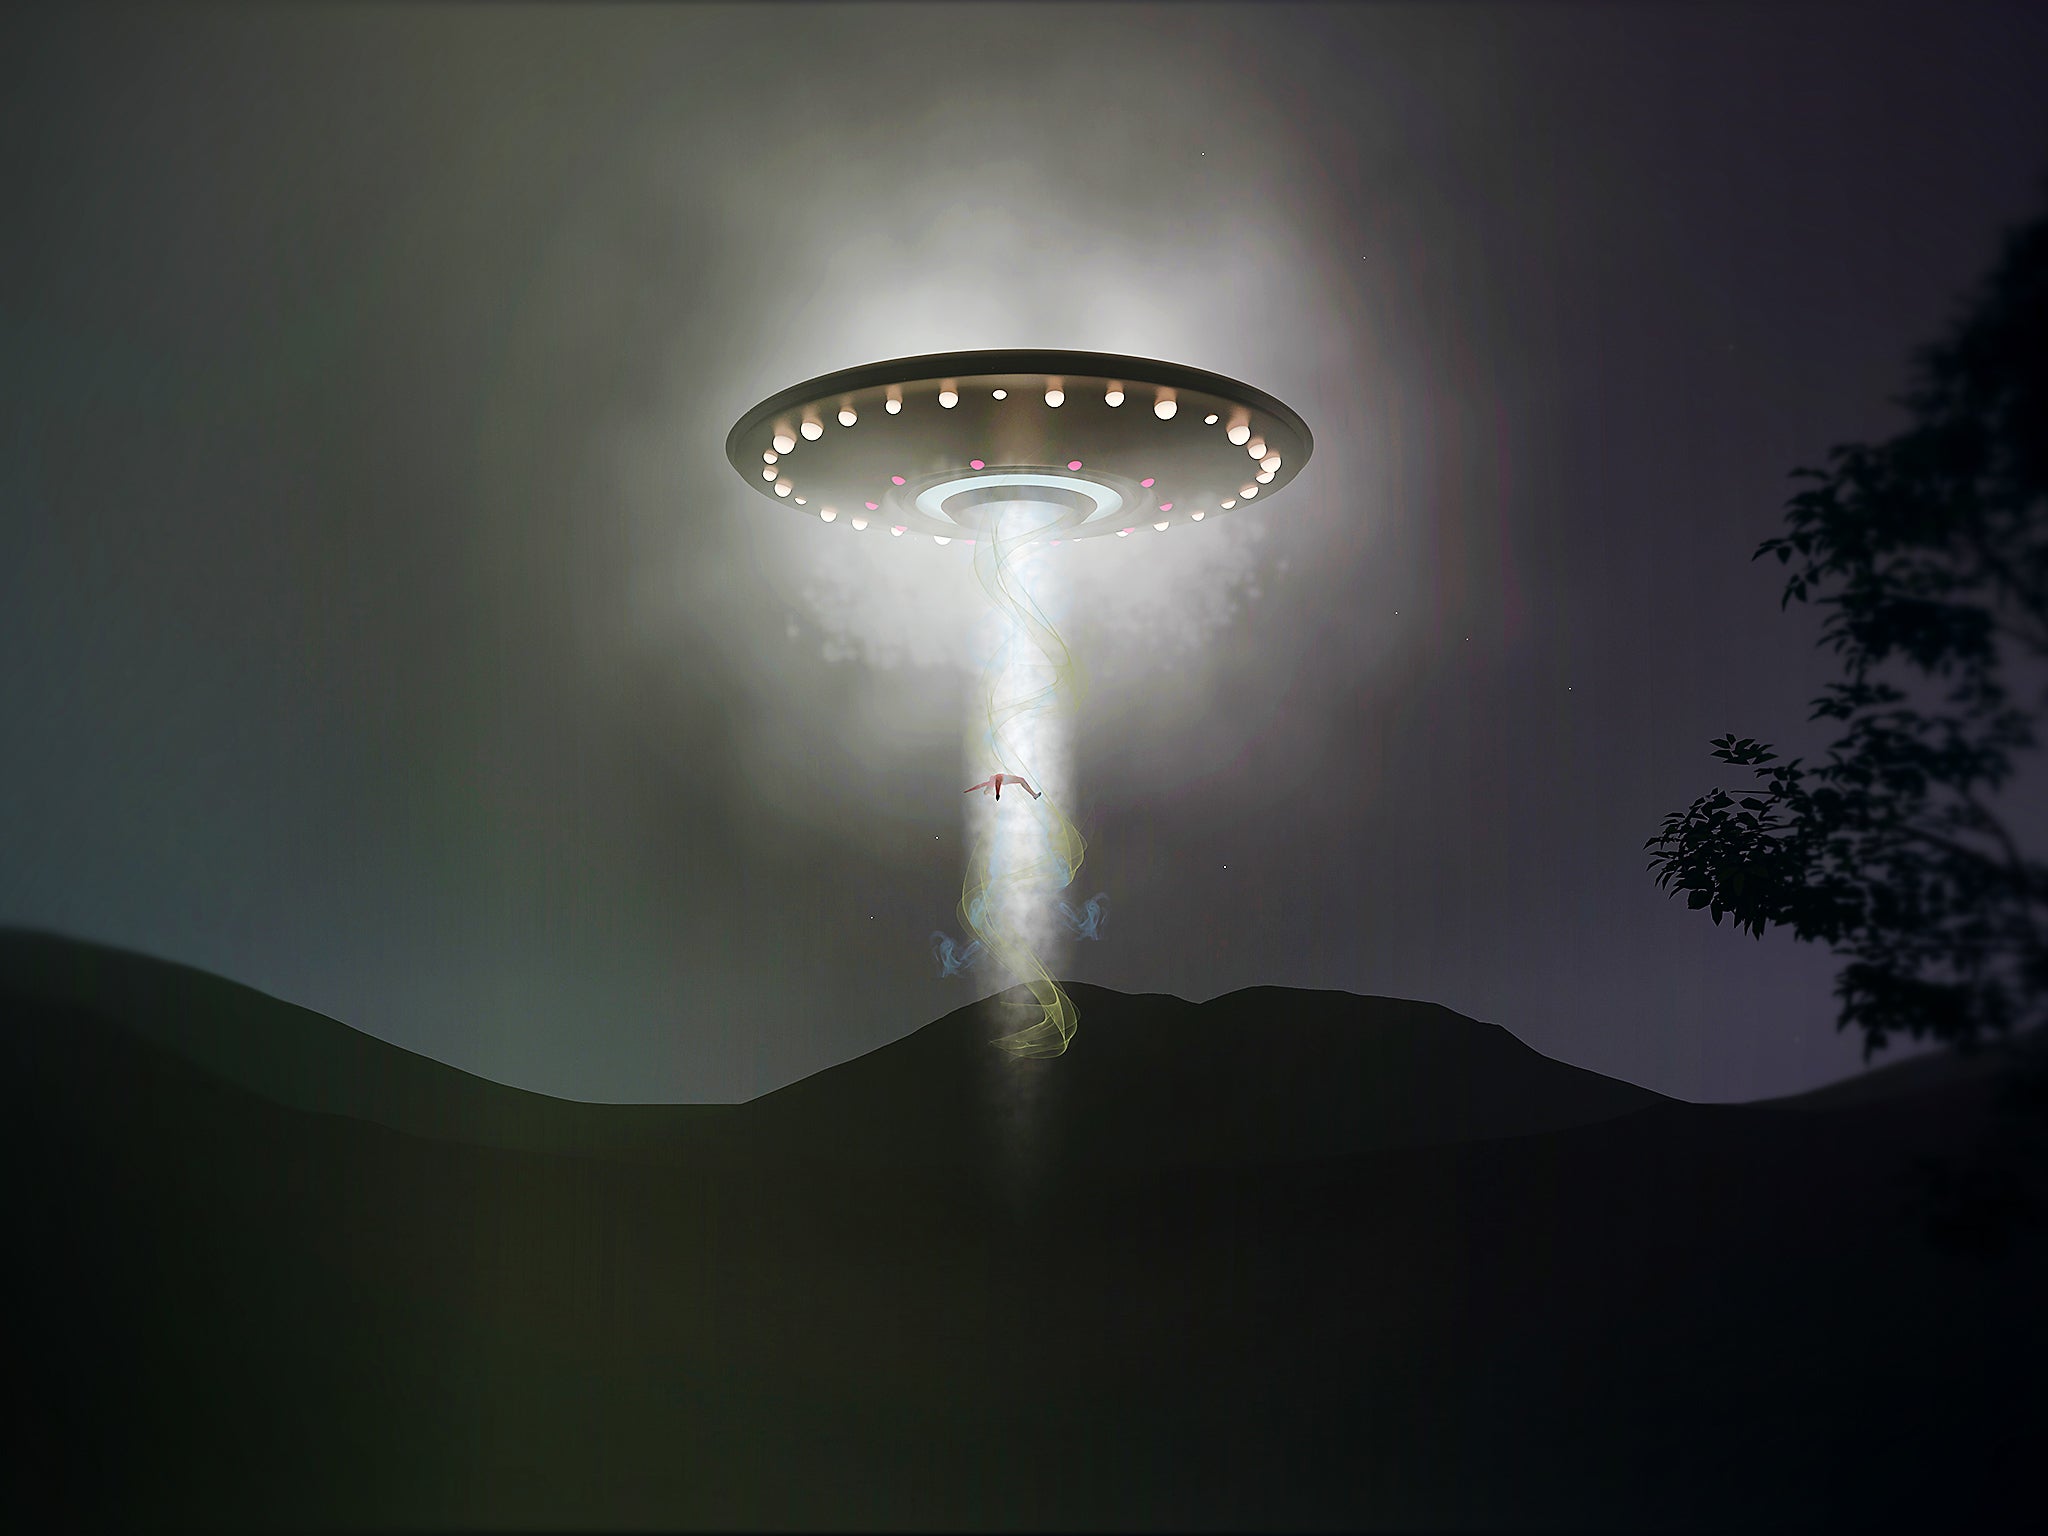 Is there something out there? Almost half of us believe in aliens